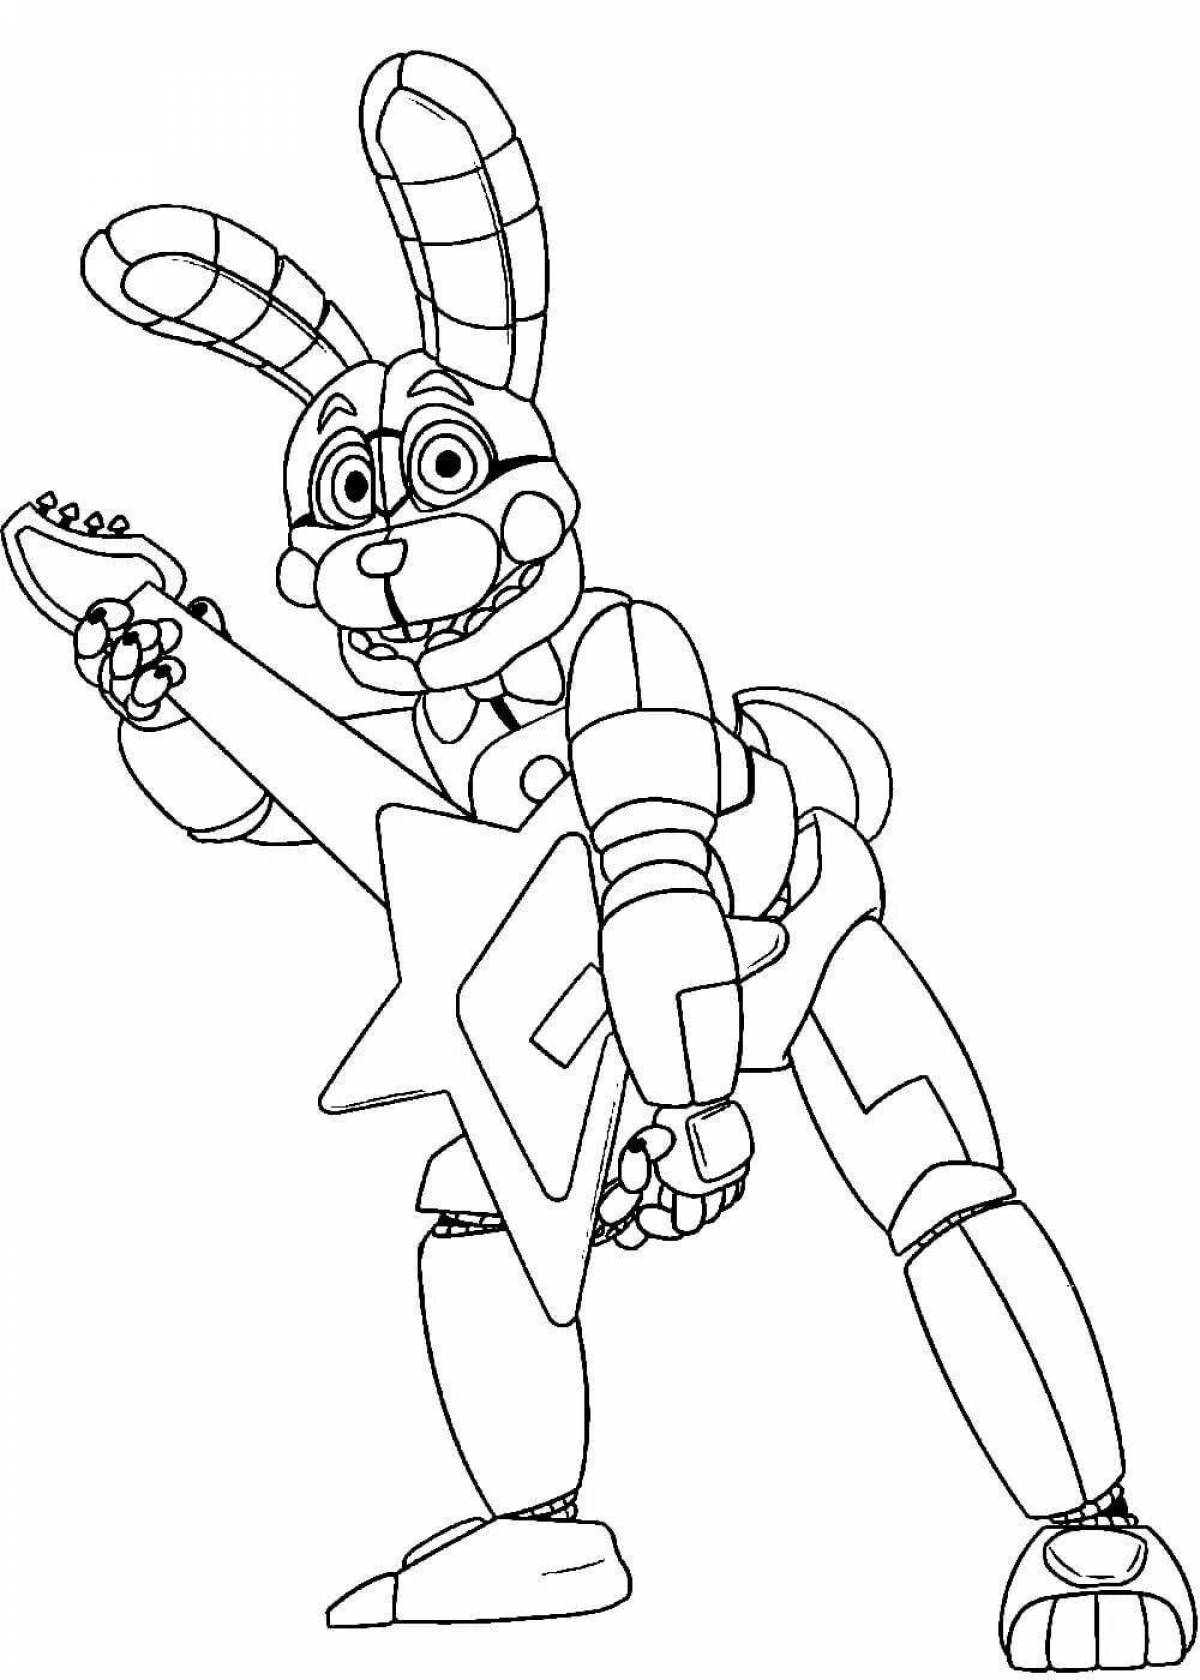 Colored bonnie from freddy coloring page